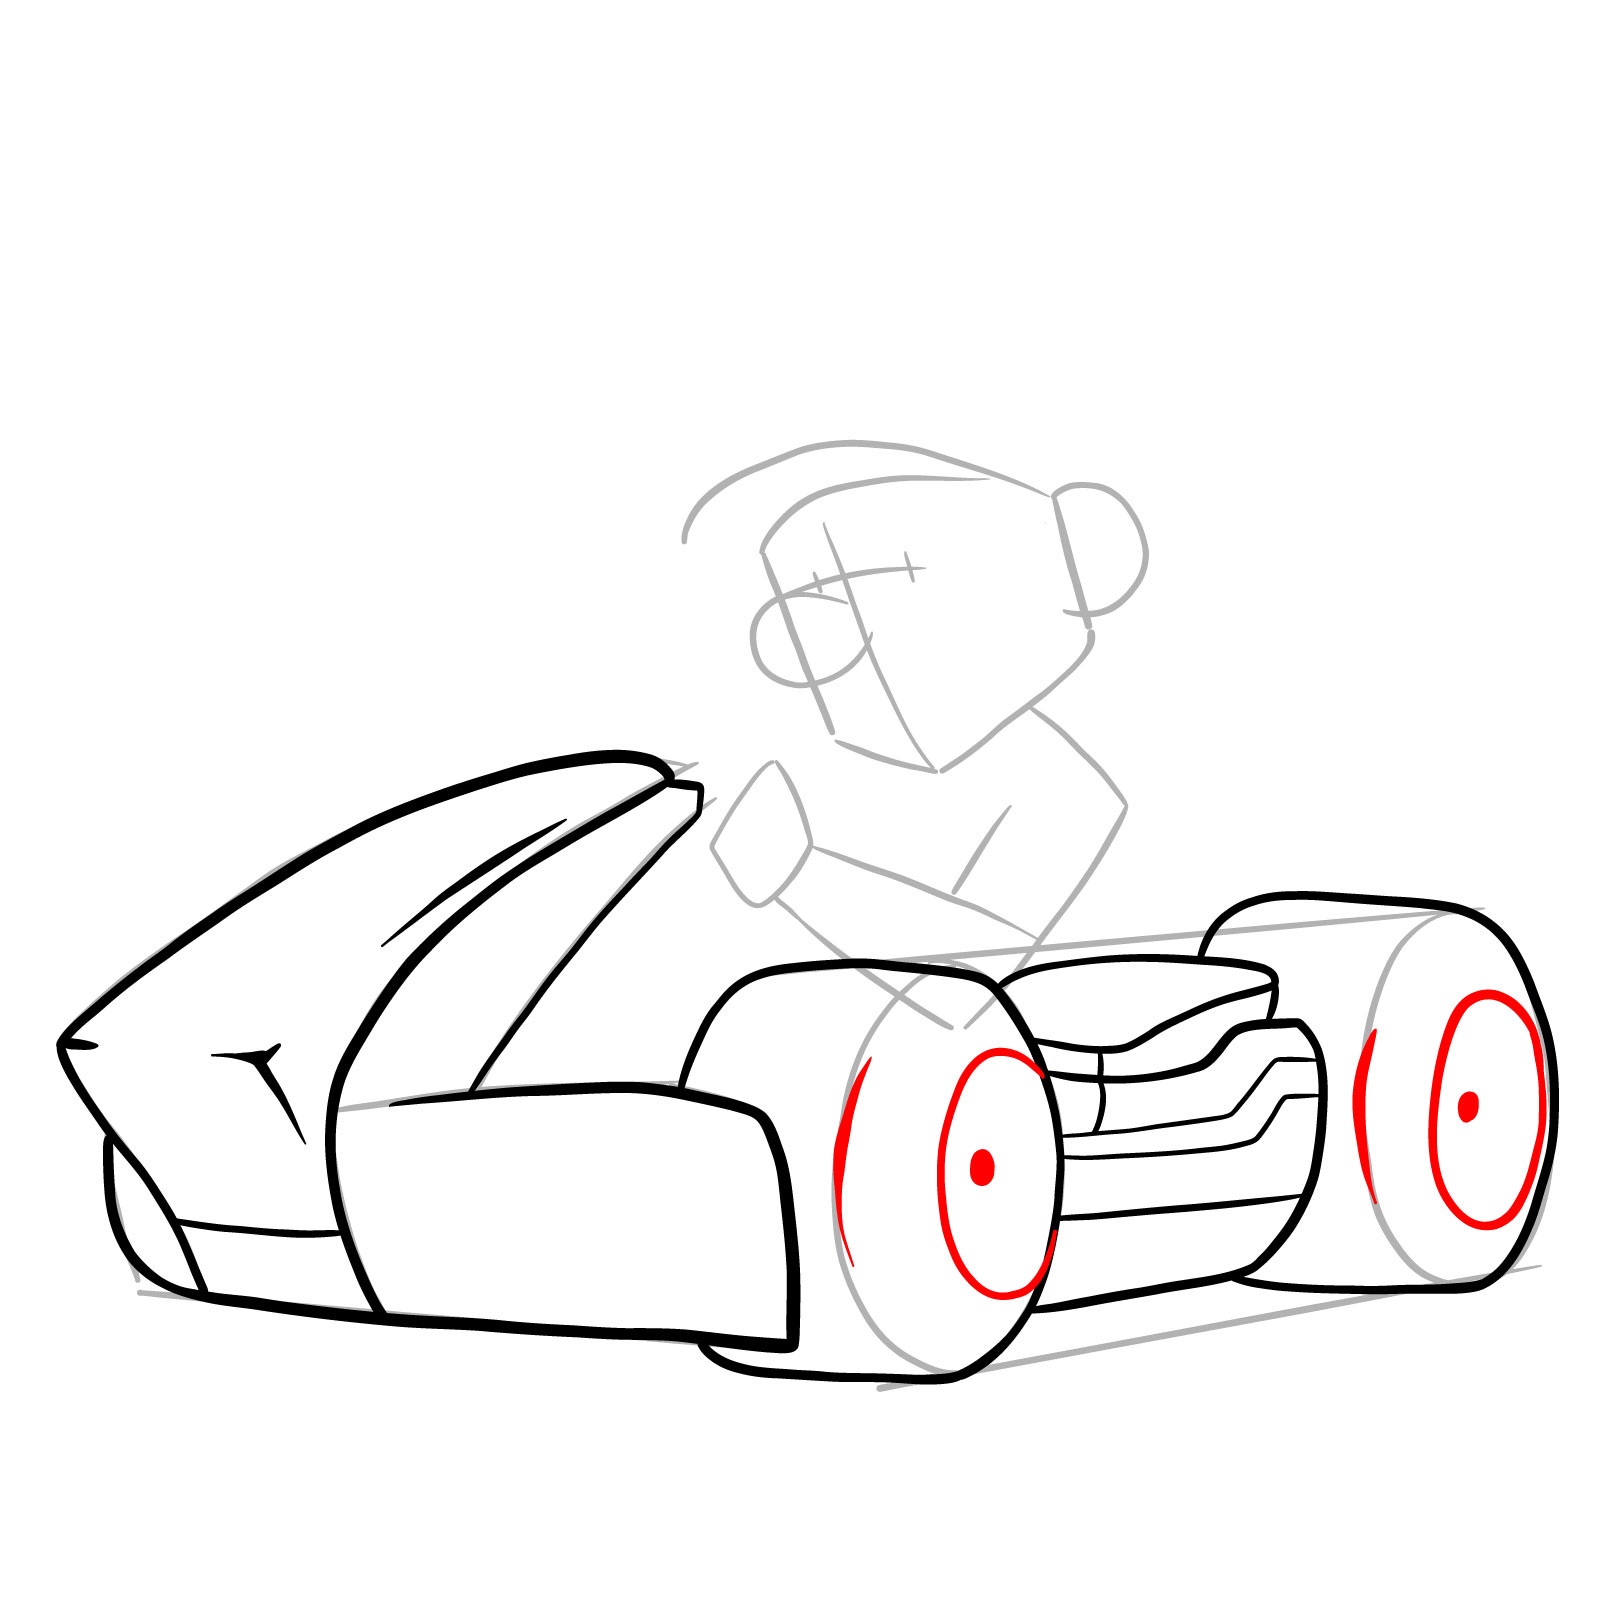 How to draw Race Traitors Mario - step 14